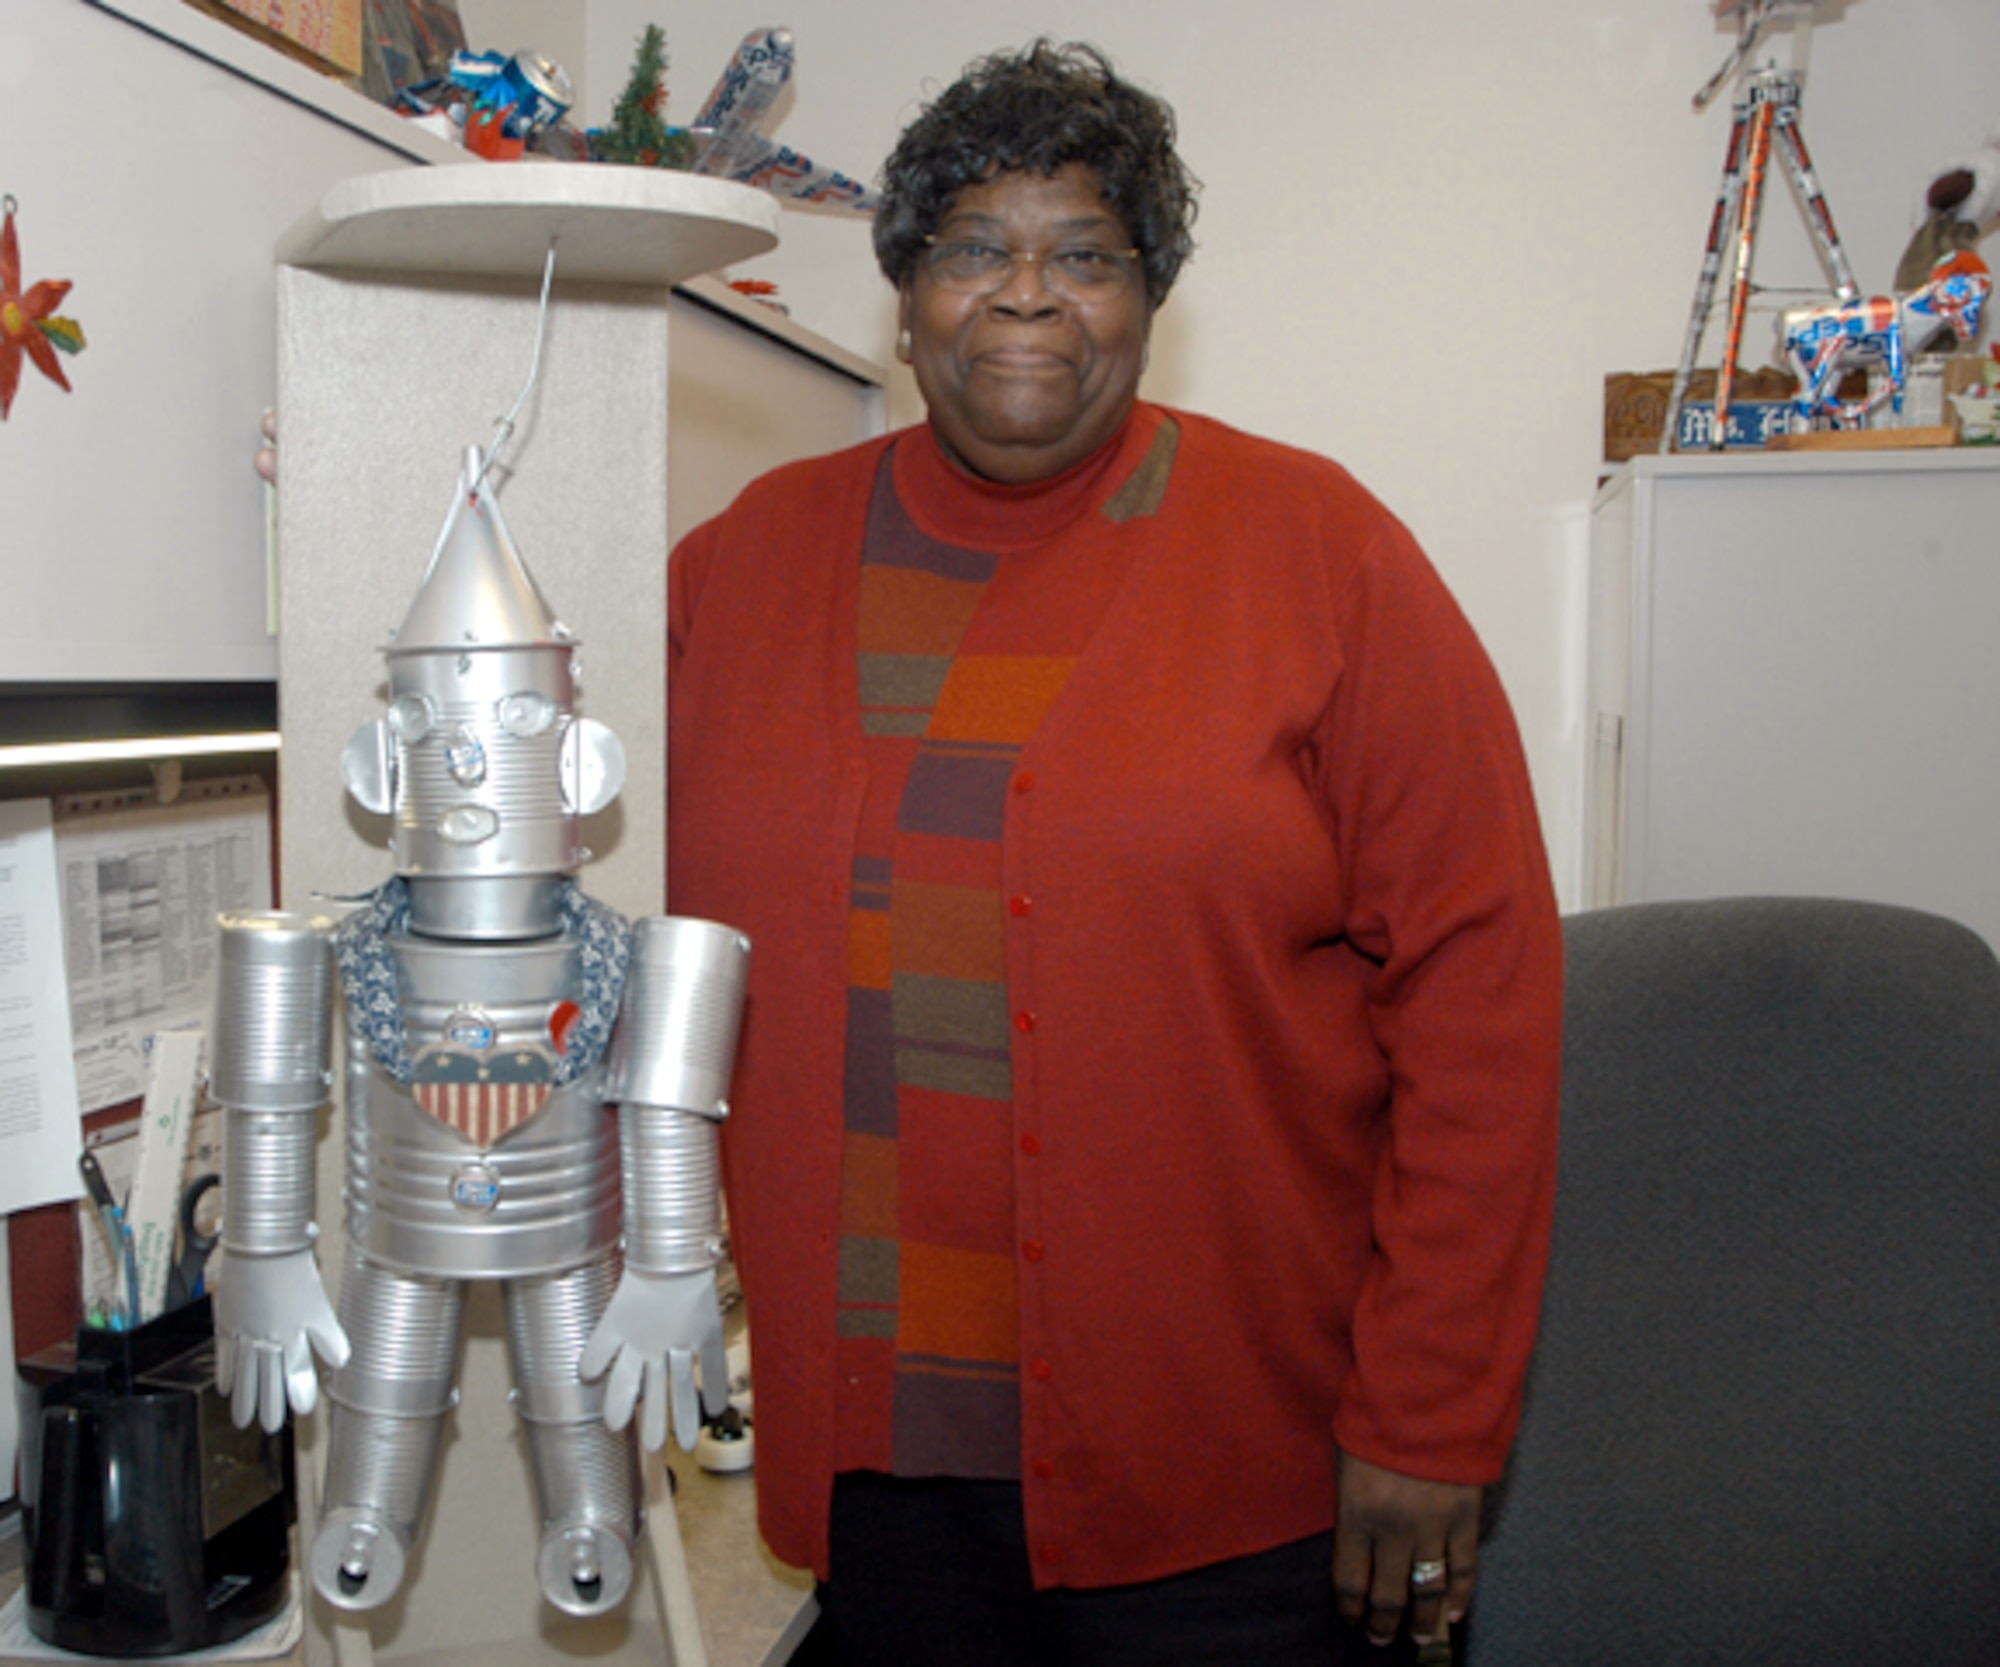 ANDREWS AIR FORCE BASE, Md. -- Helen Walker displays a true tin man, her favorite personal can creation.  Walker uses all types of cans and recycled materials to create a variety of sculptures.  She is the 89th Civil Engineer Squadron's maintenance flight quality assurance evaluator.  (U.S. Air Force photo by Bobby Jones)